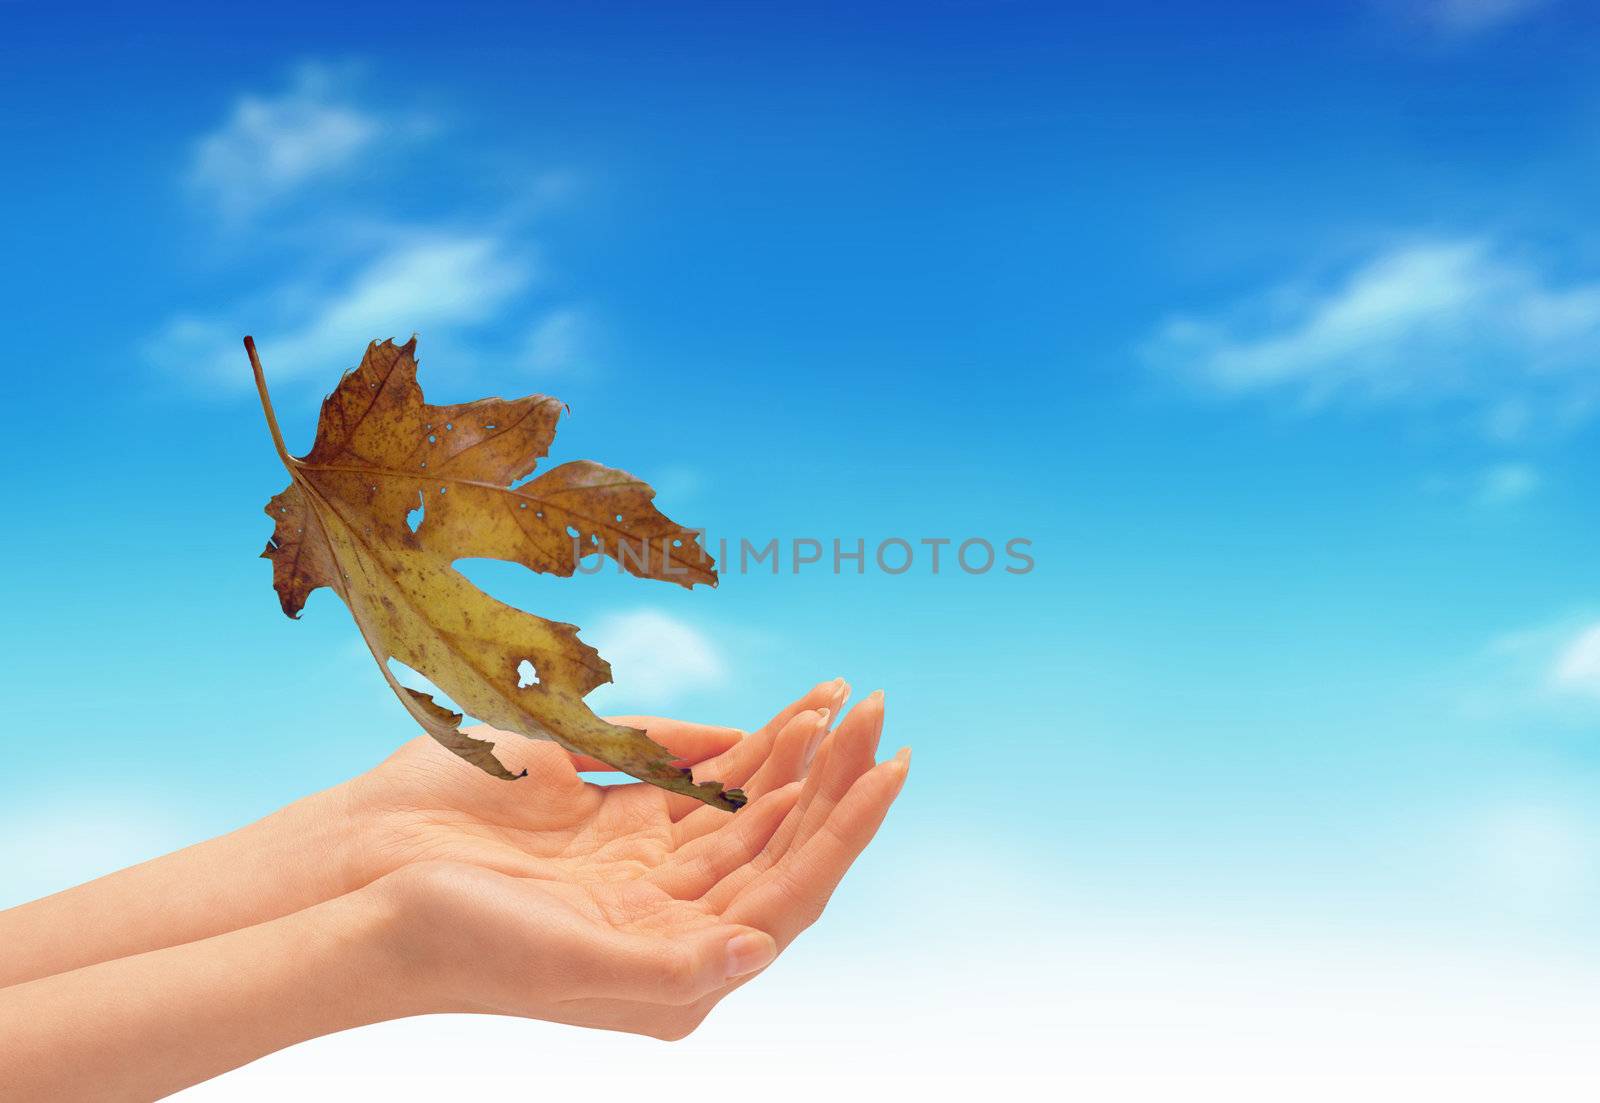 NIce picture with a leaves and hands